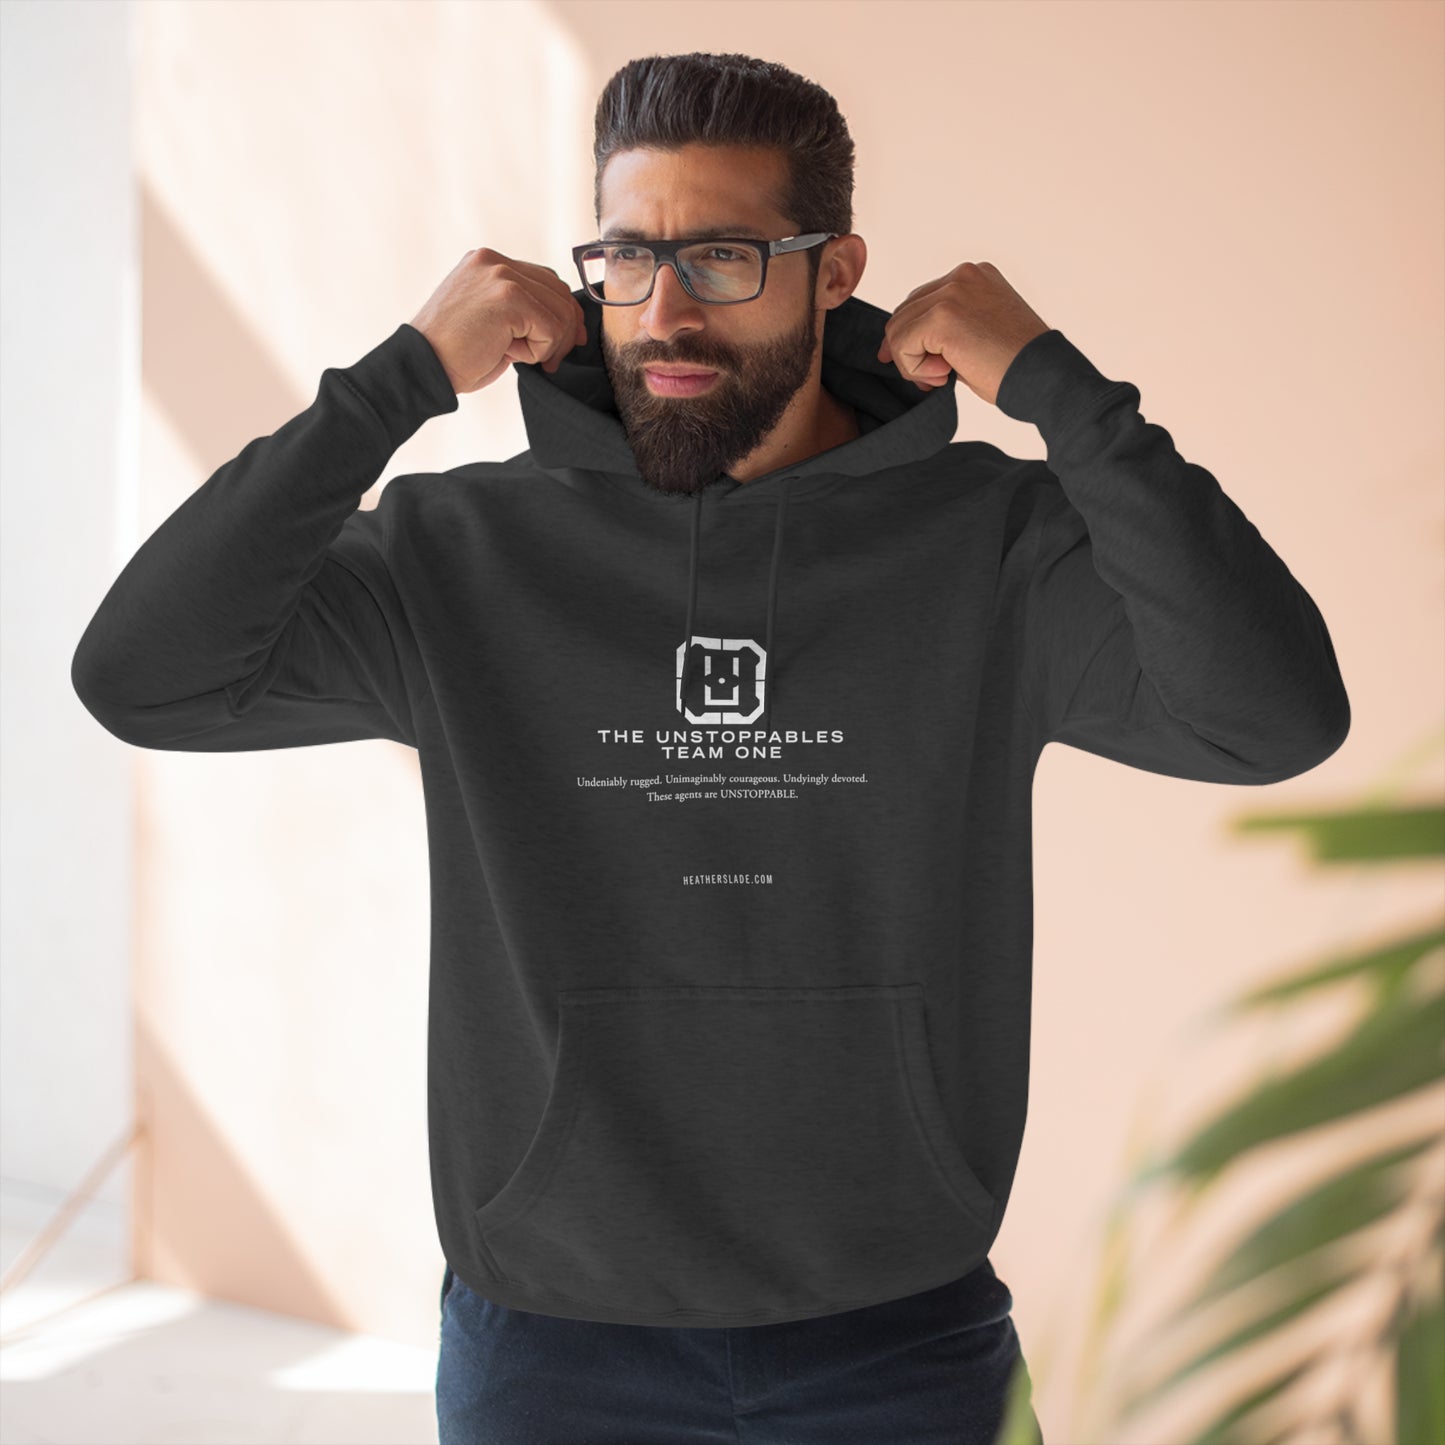 The Unstoppables Team One Pullover Hoodie